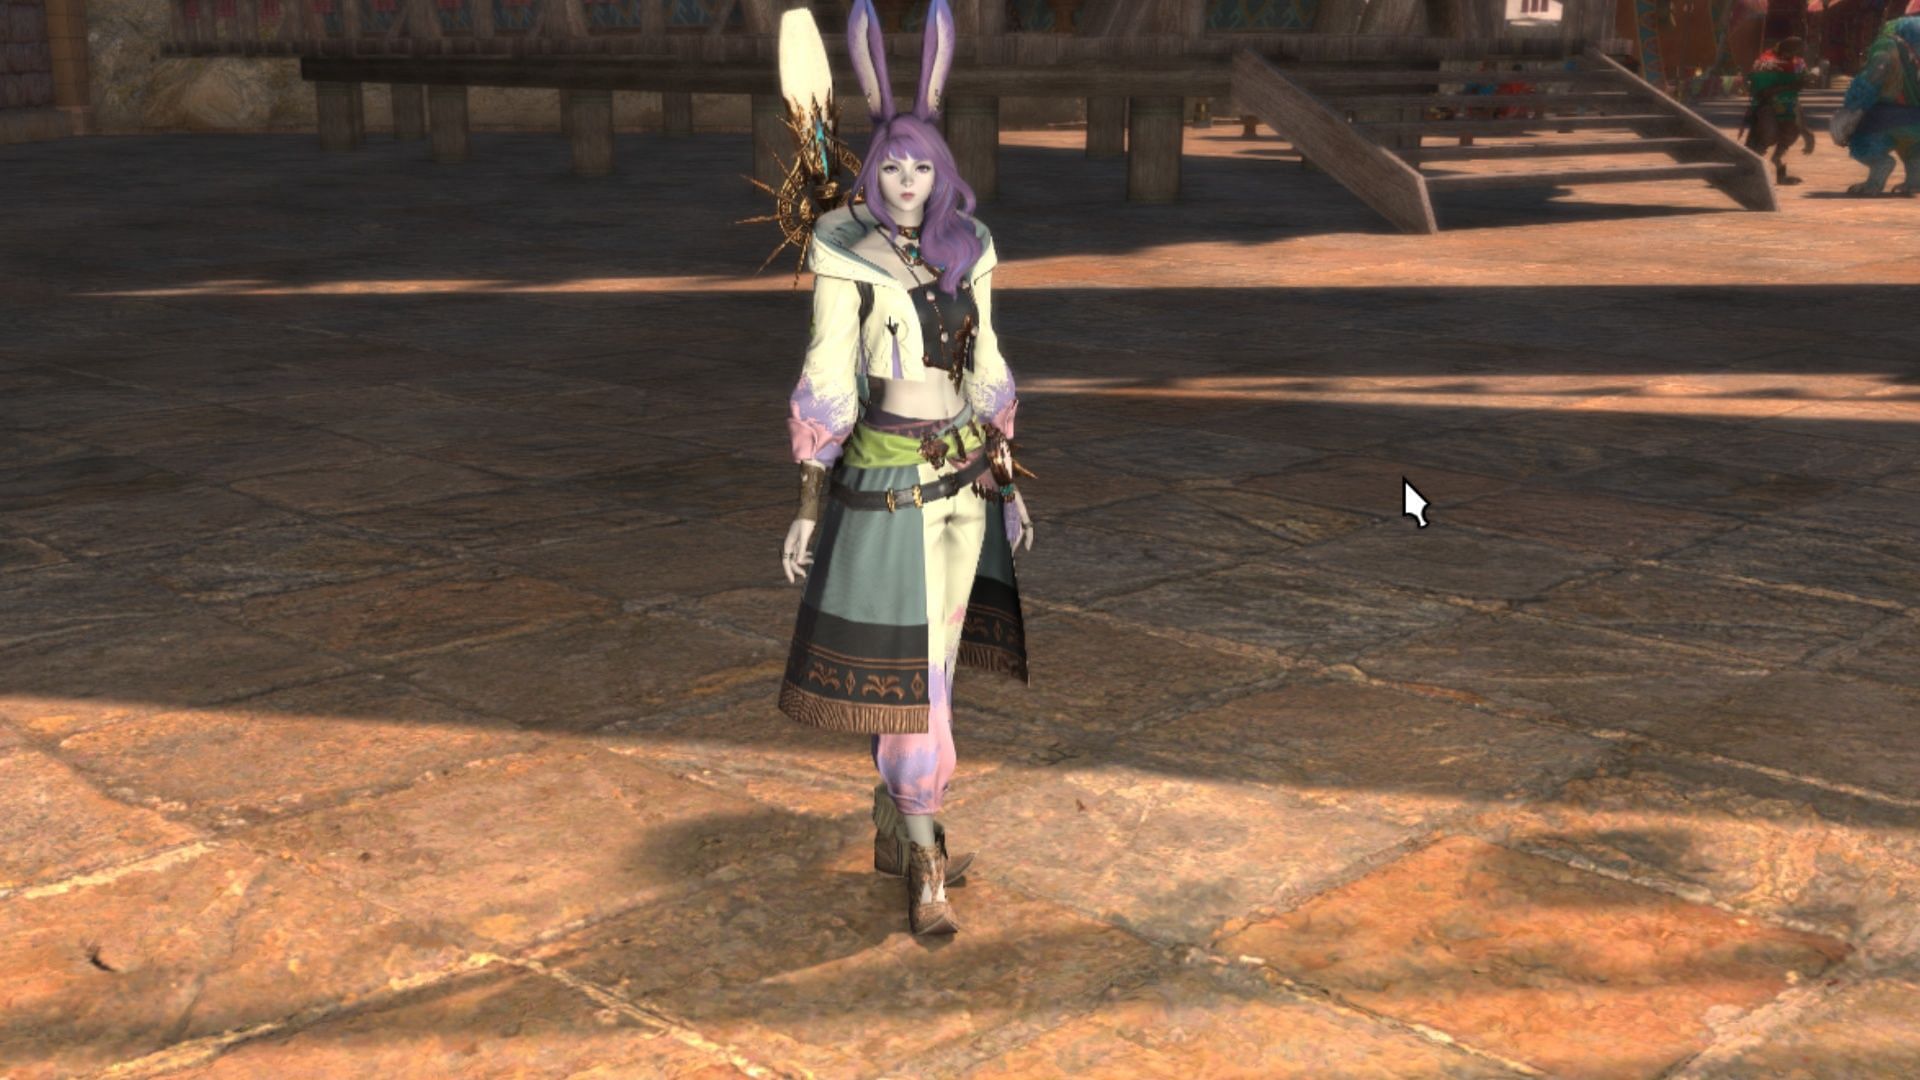 The Level 99 gear we got access to during this preview - the Pictomancer gear is amazing (Image via Square Enix)